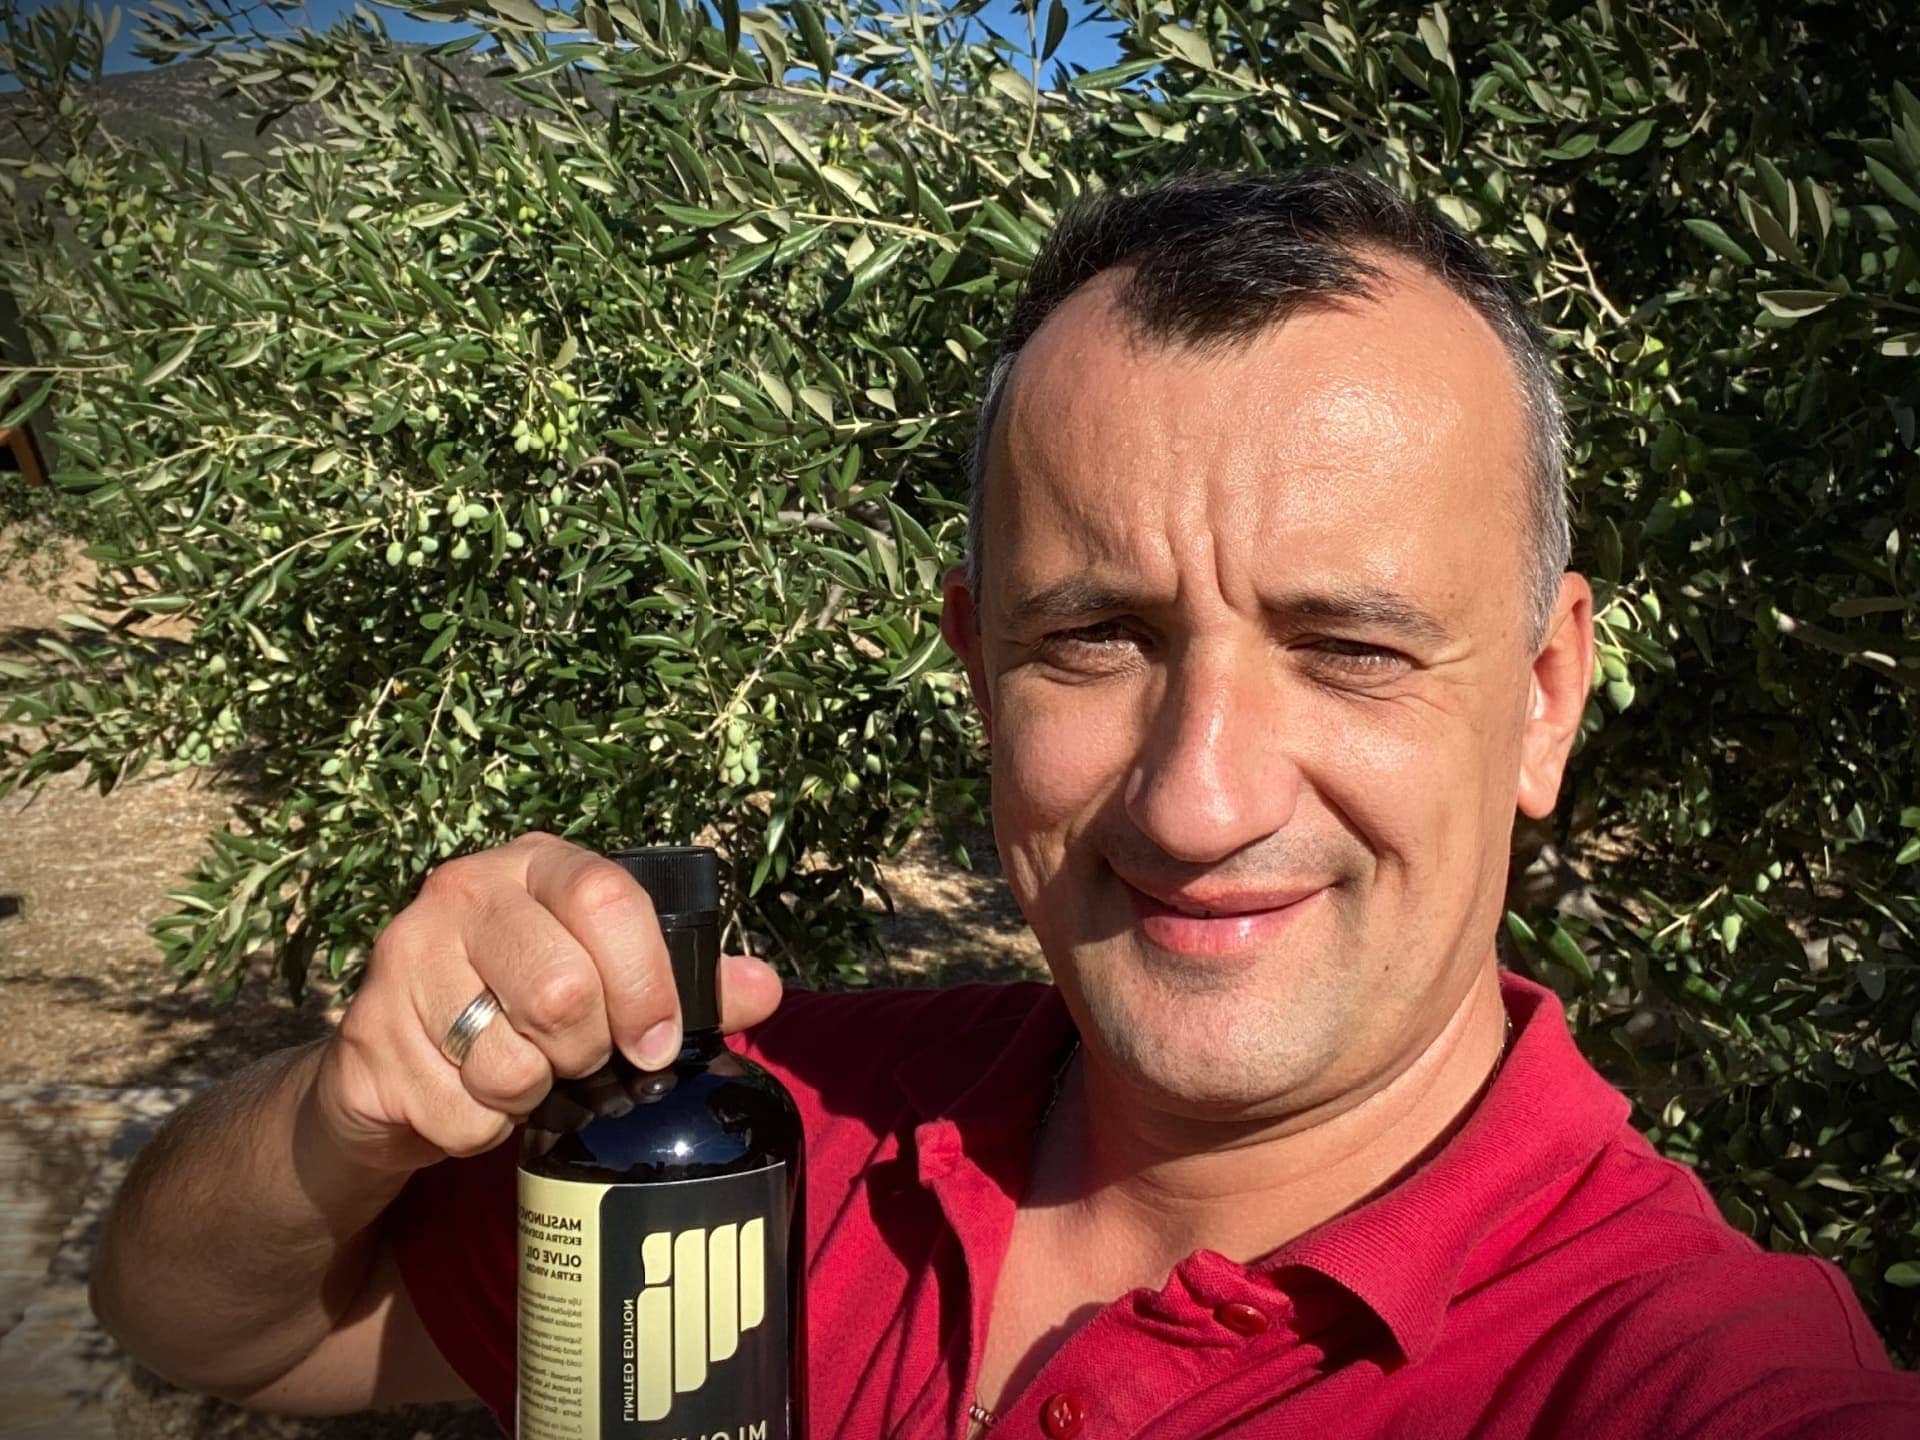 europe-profiles-the-best-olive-oils-production-awardwinning-producer-dedicates-accolade-to-late-wife-olive-oil-times